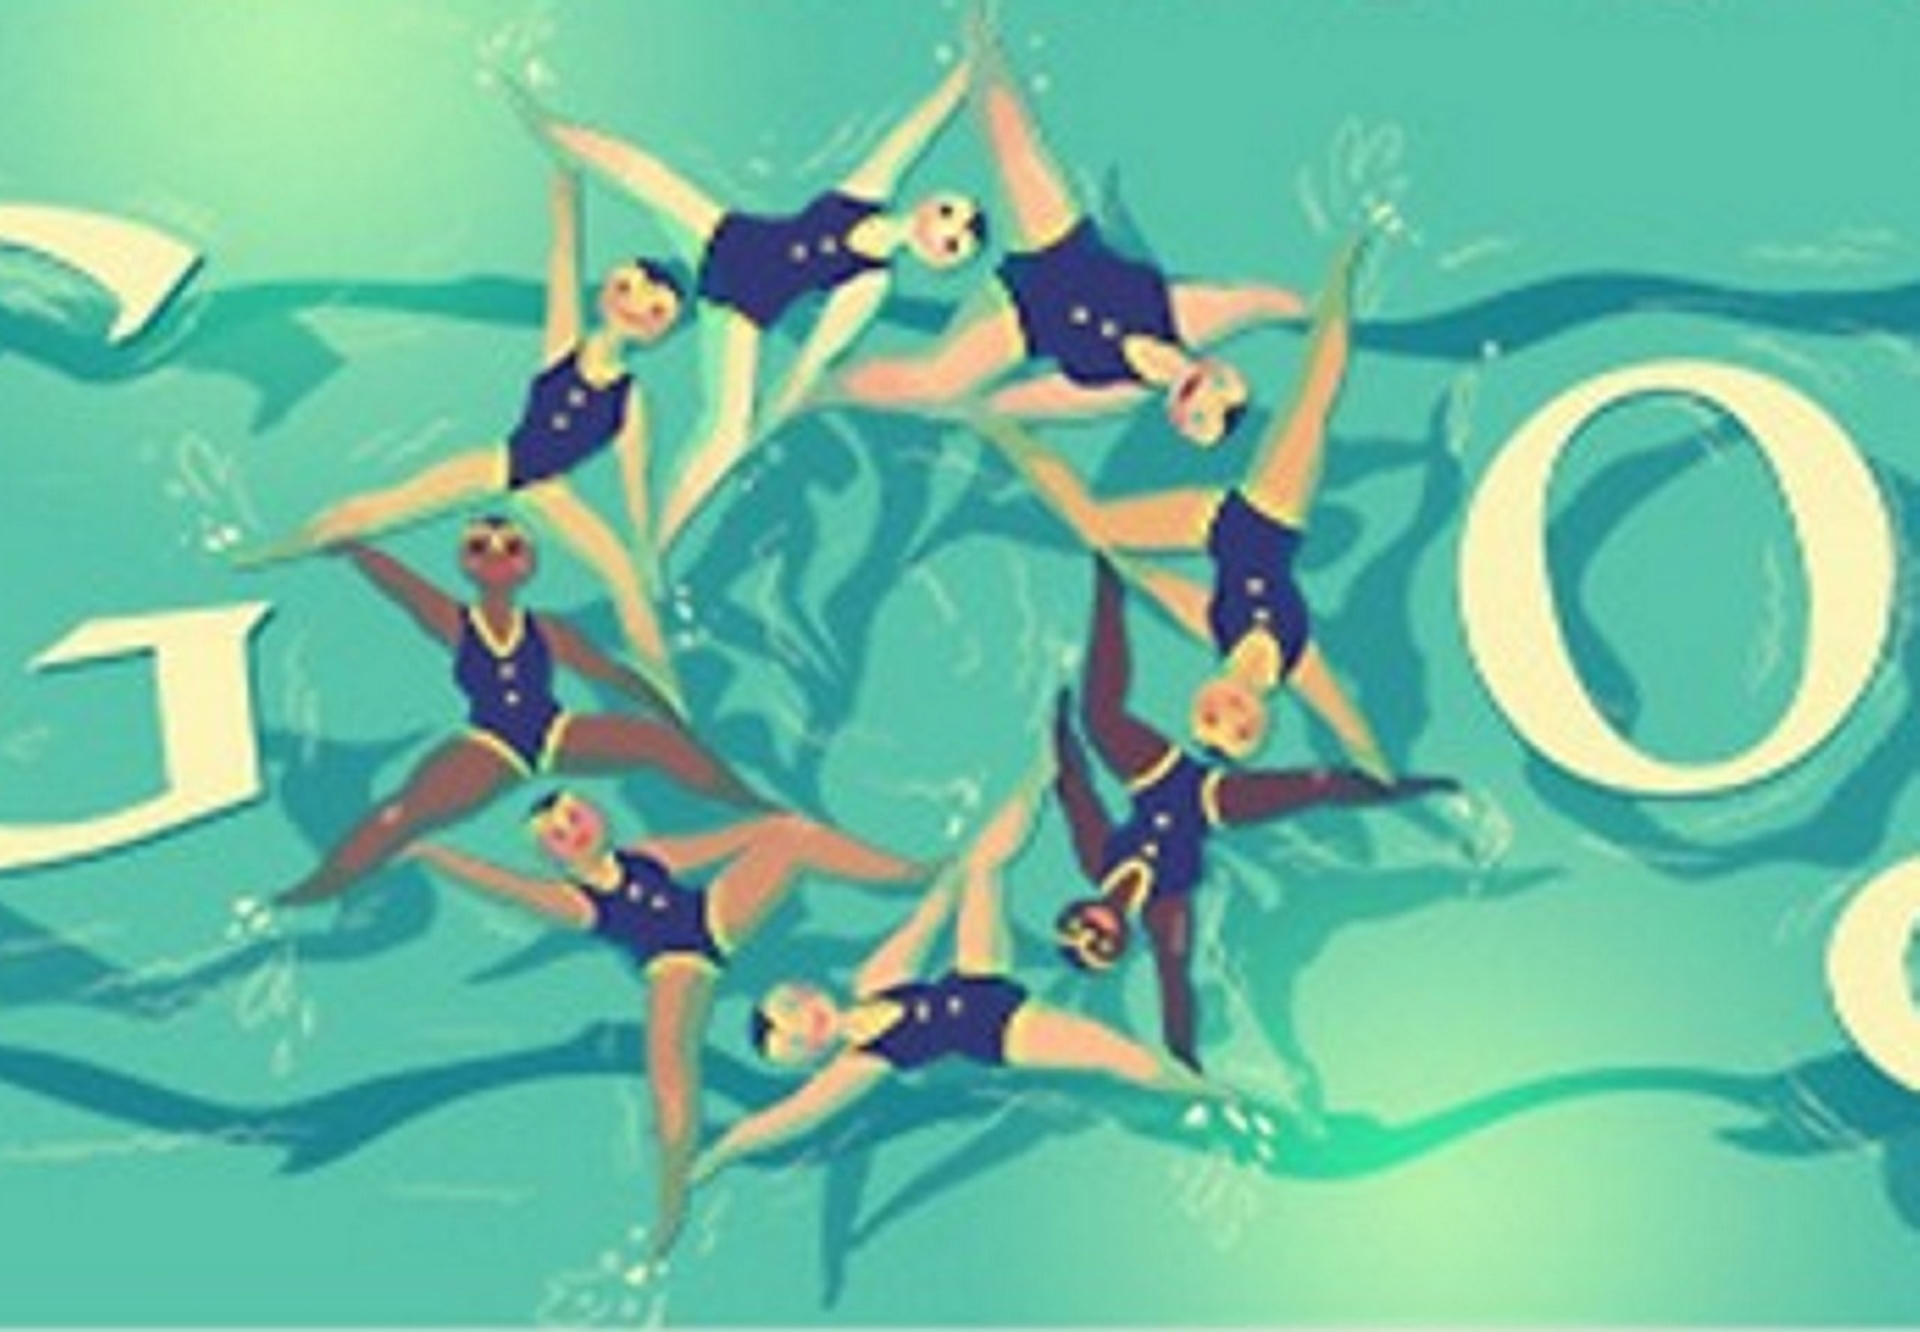 London 2012 Synchronised Swimming